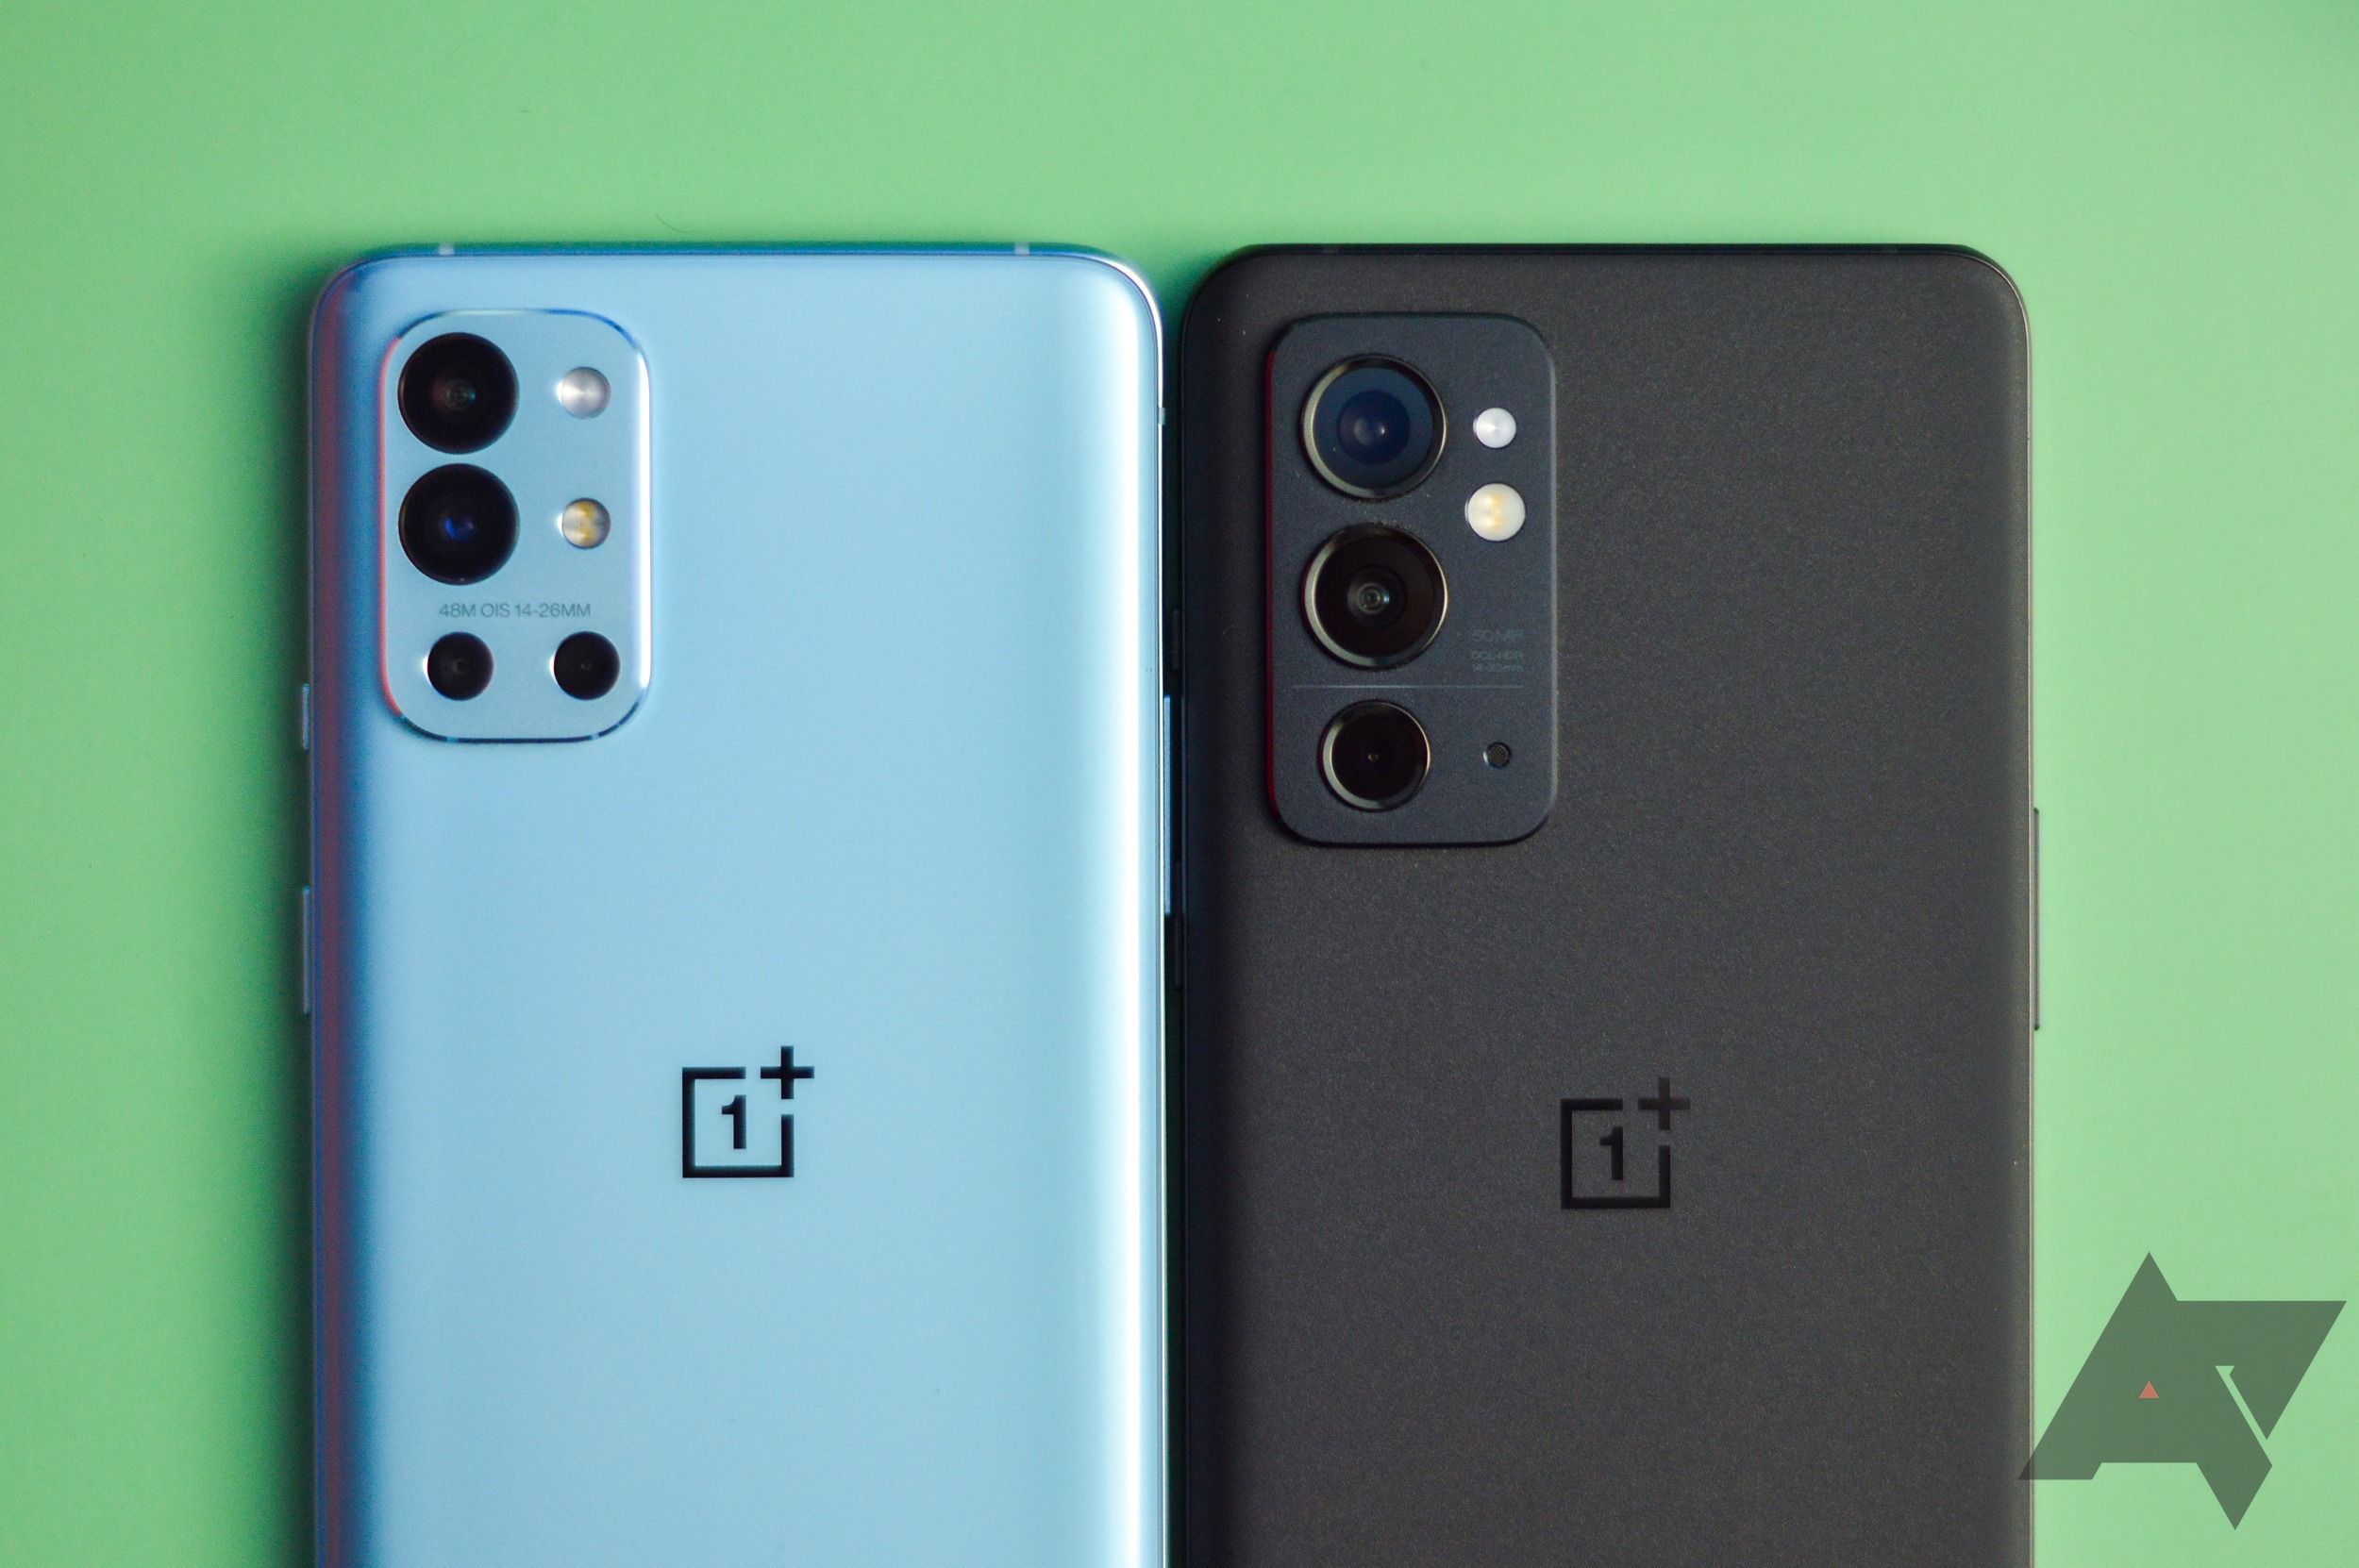 OnePlus commits to fixing annoying Gallery app freezes